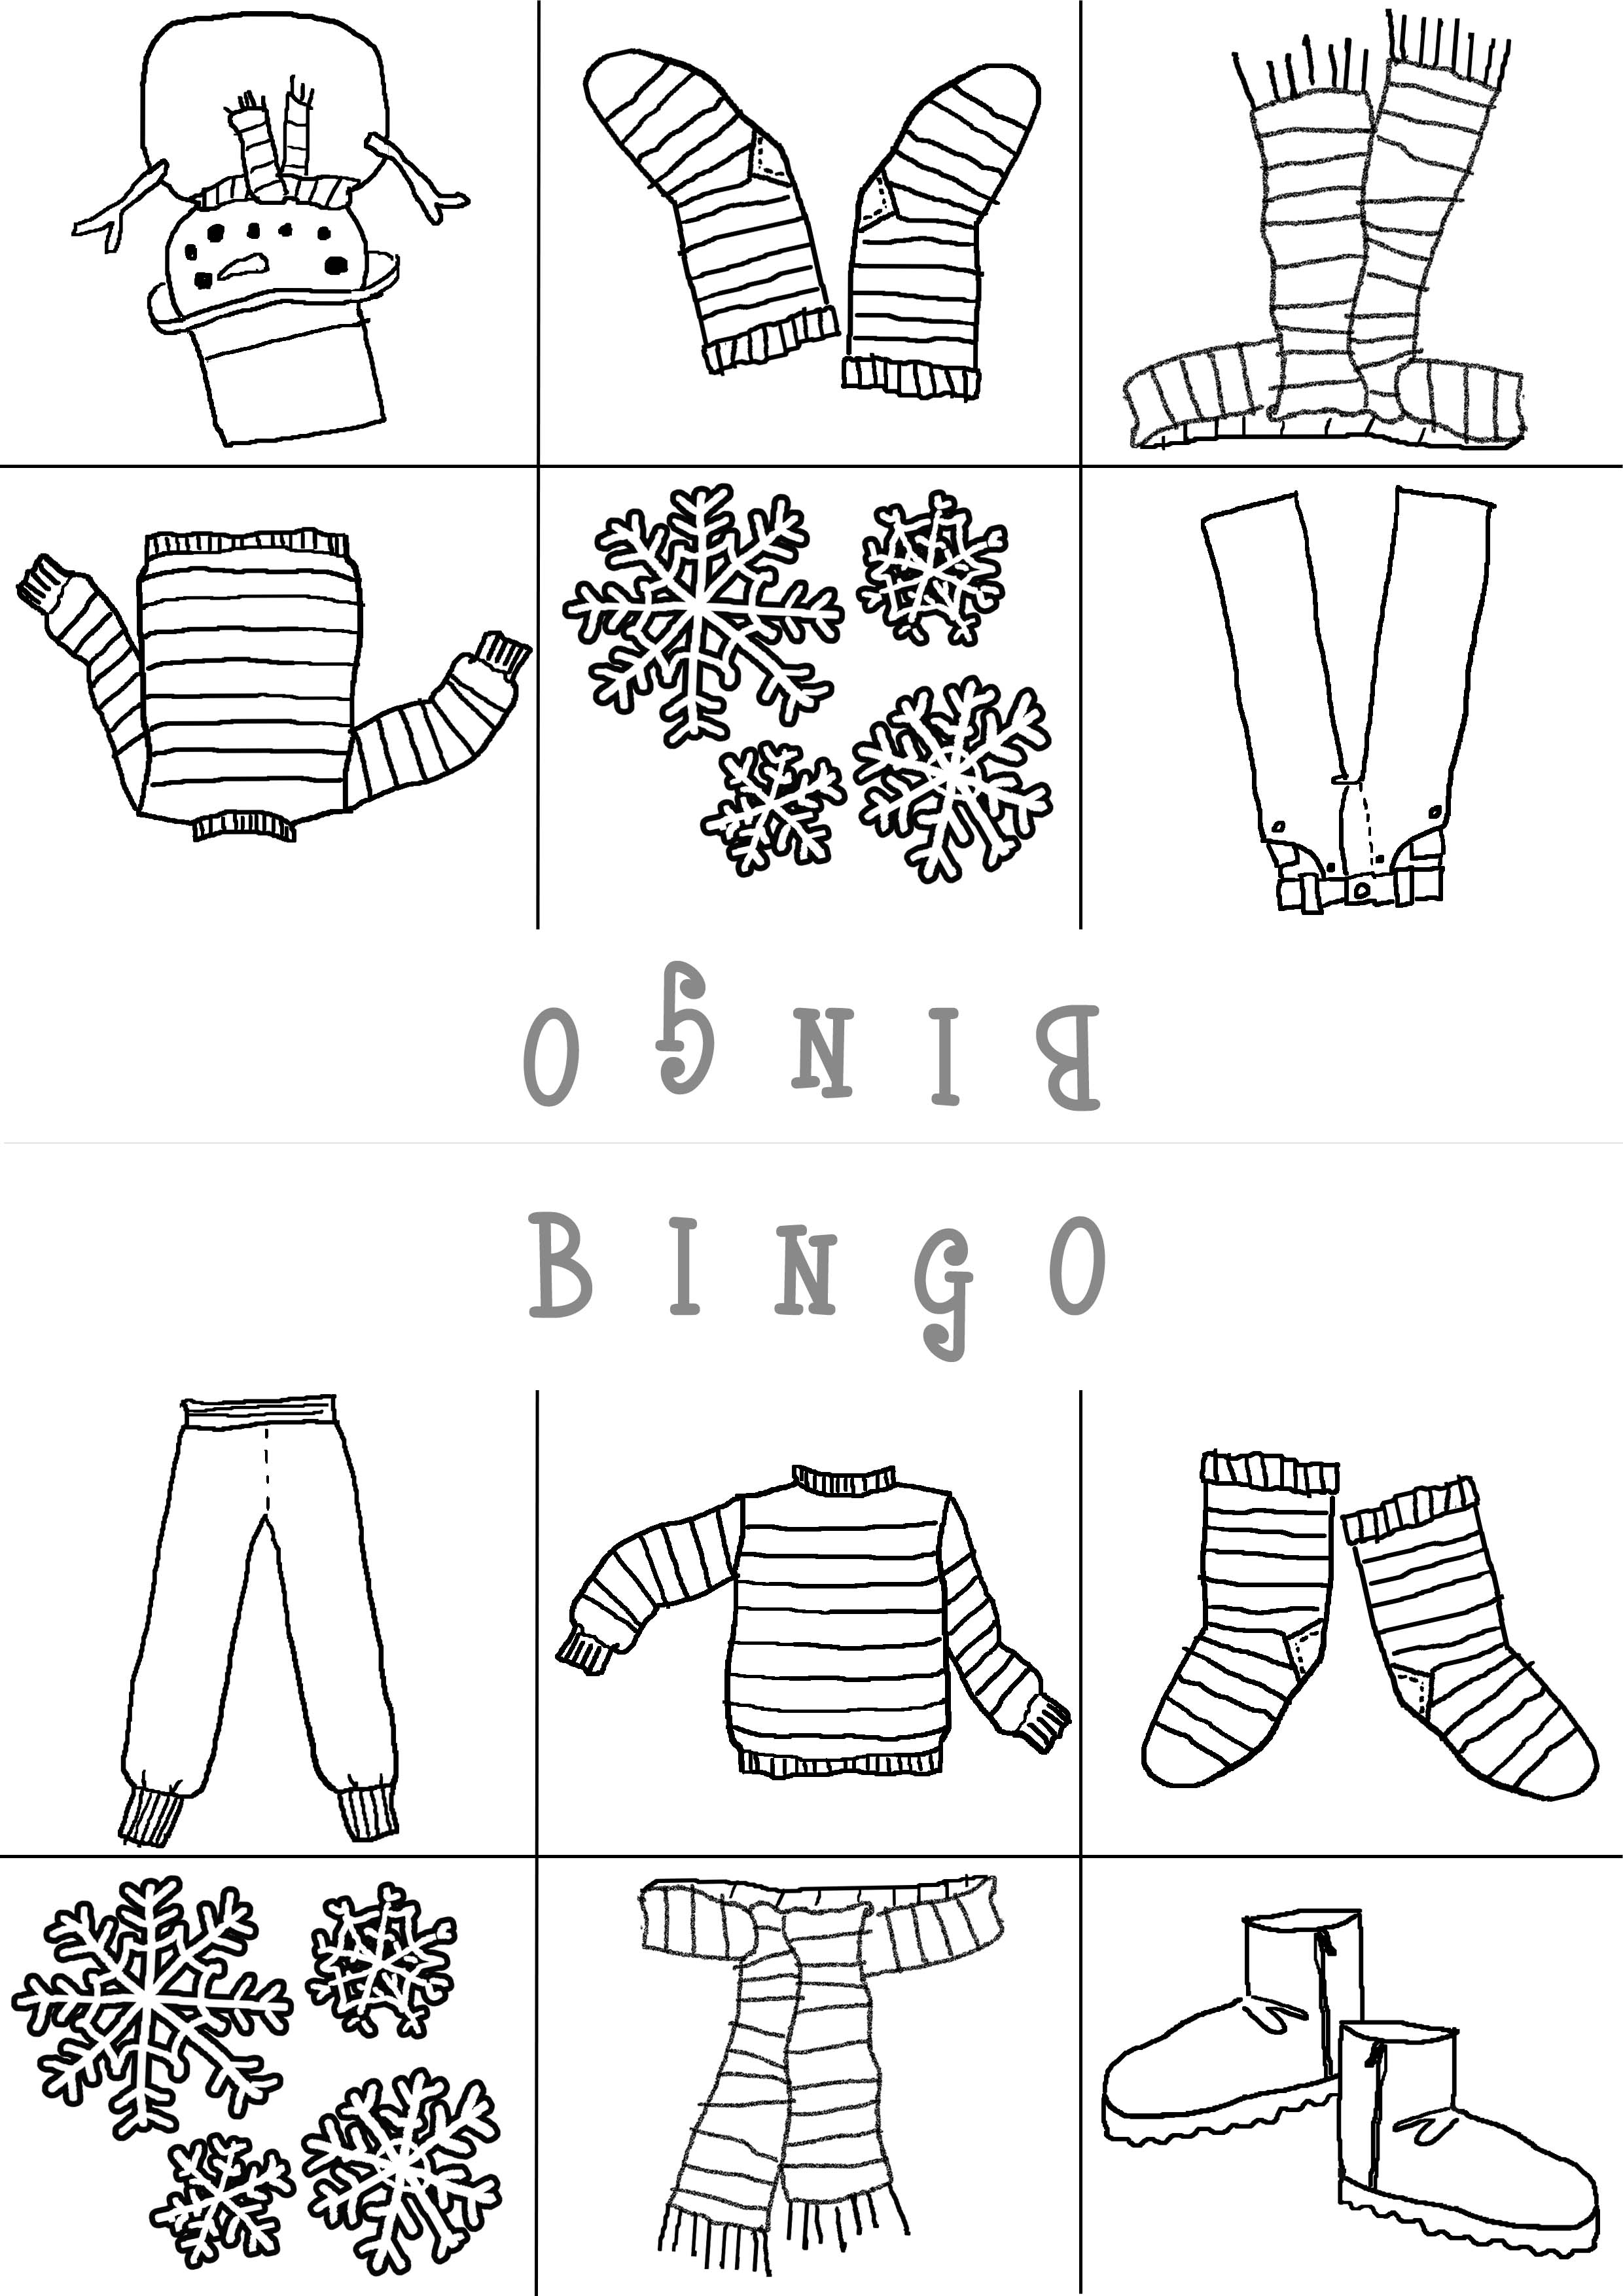 11 Best Images of Preschool Winter Clothes Worksheets - Free Printable ...